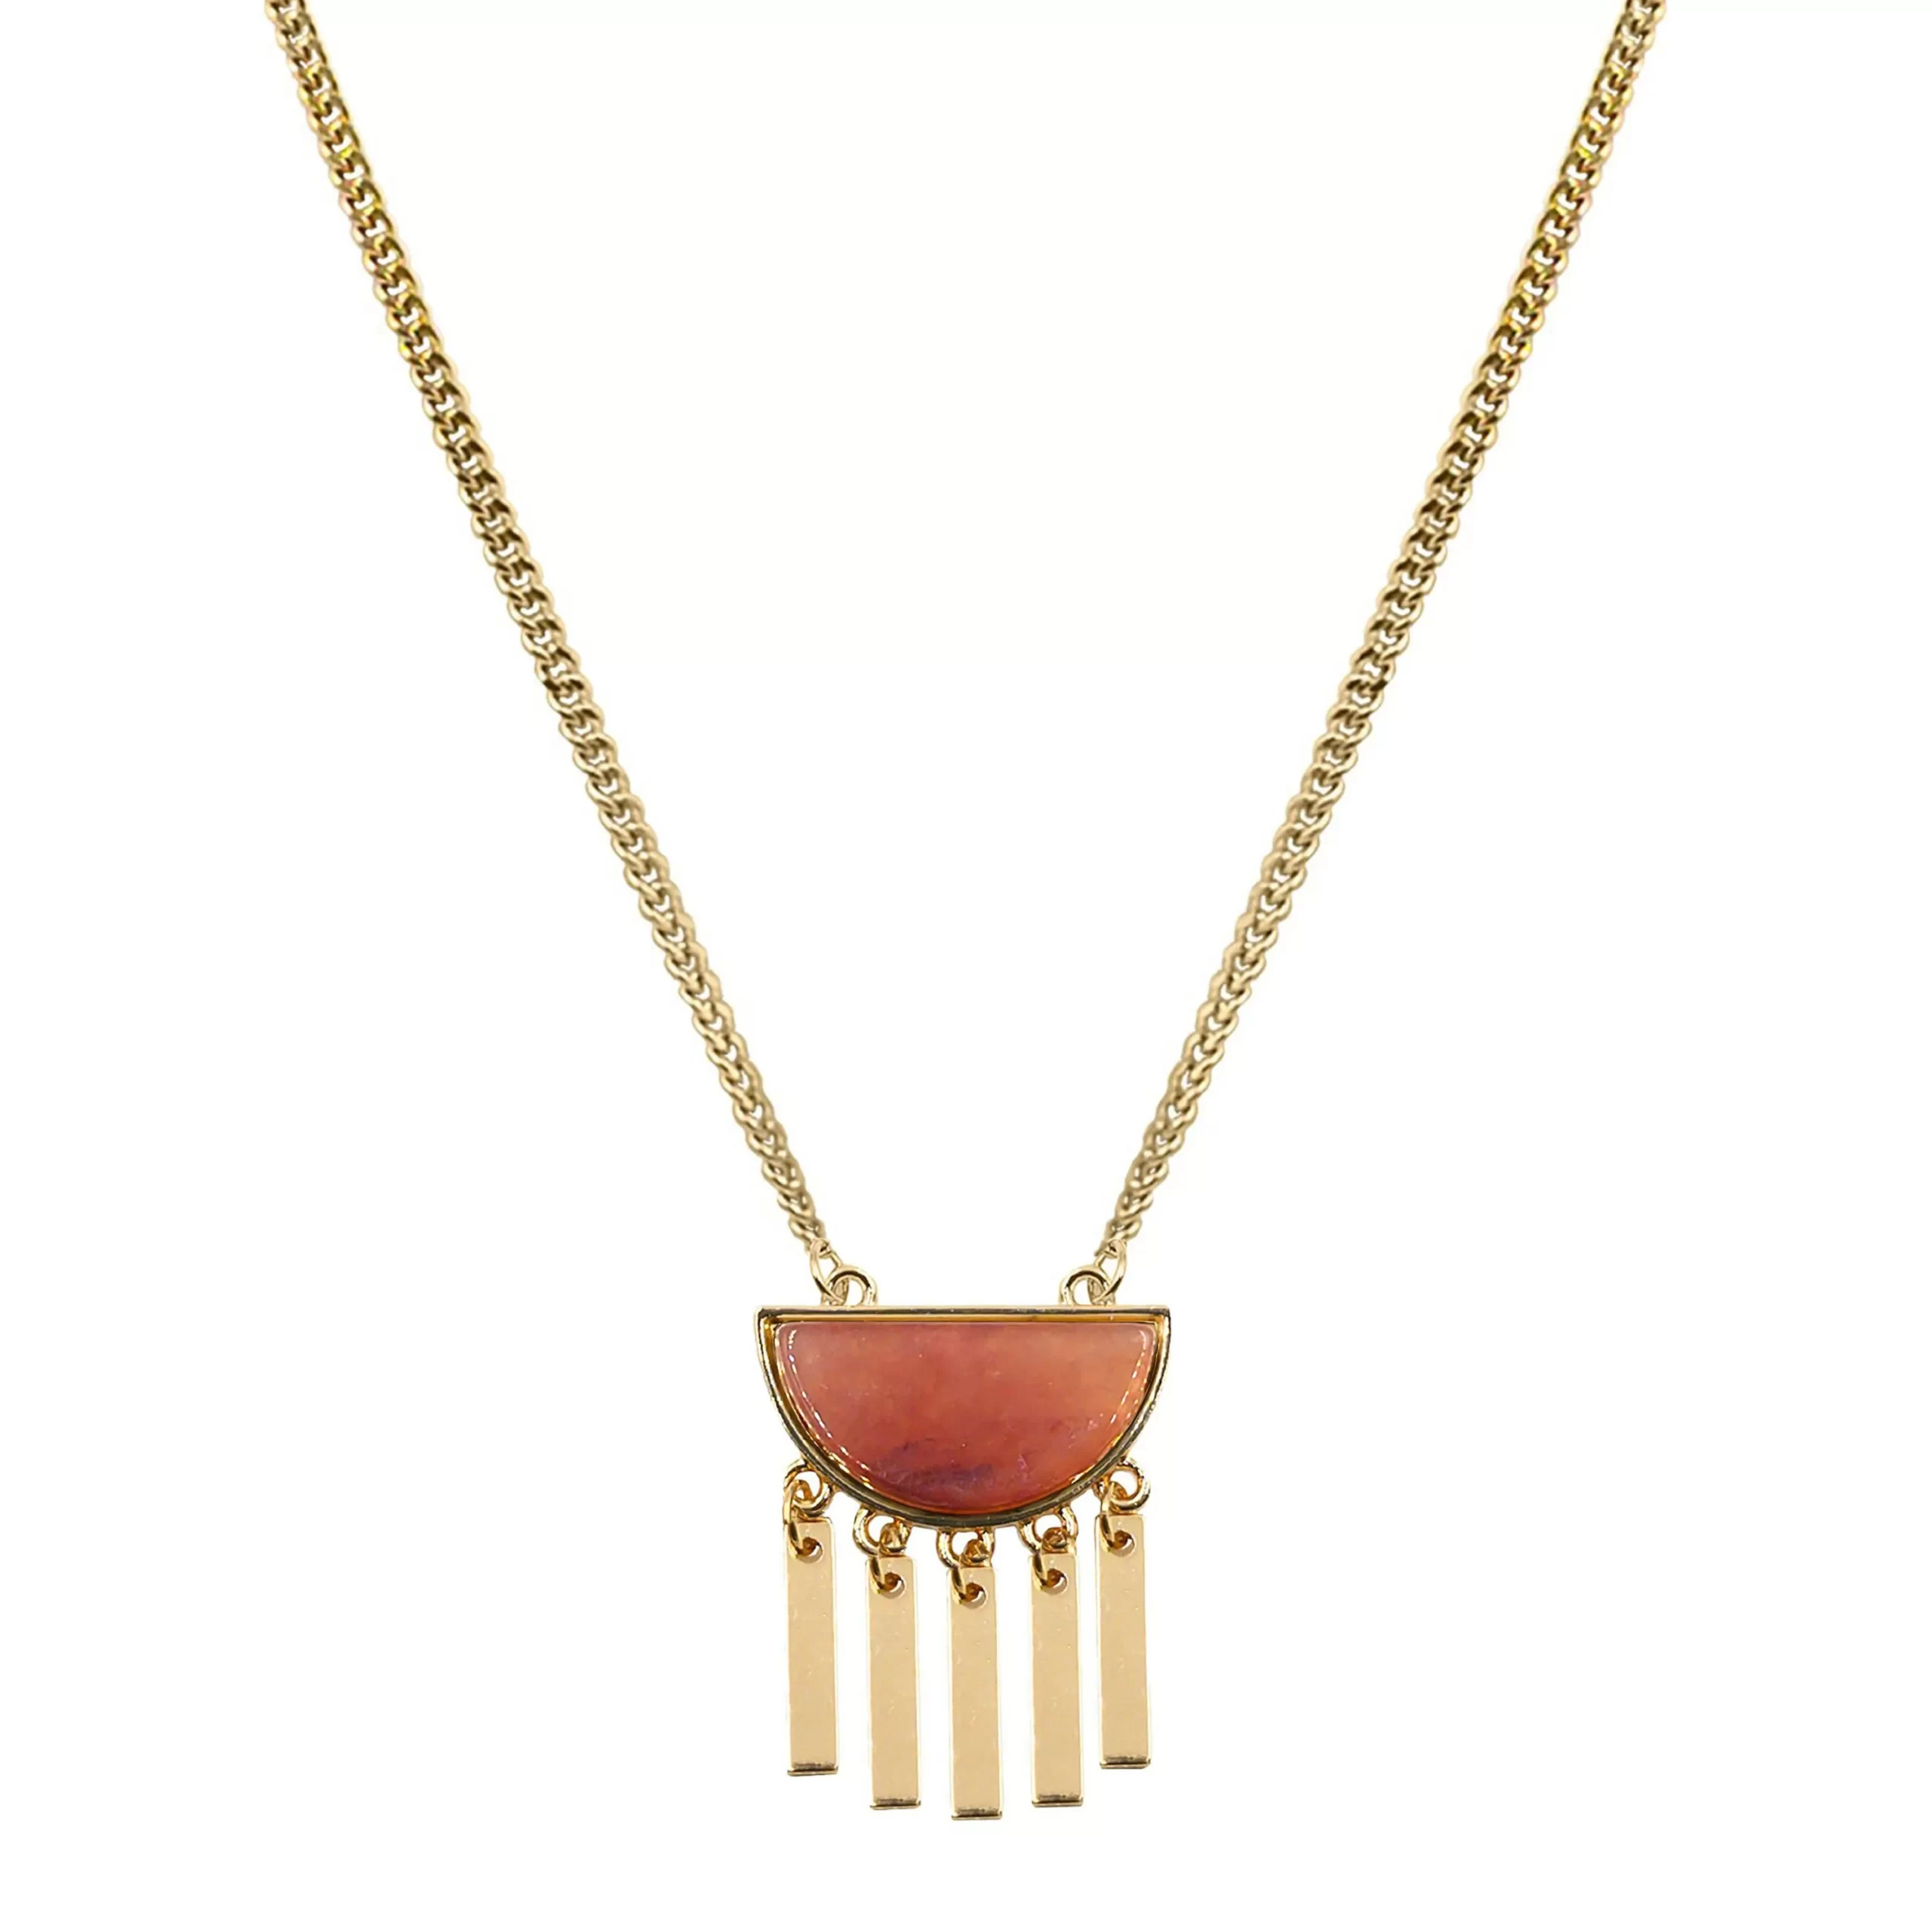 ARAGONITE NECKLACE (LIMITED EDITION)